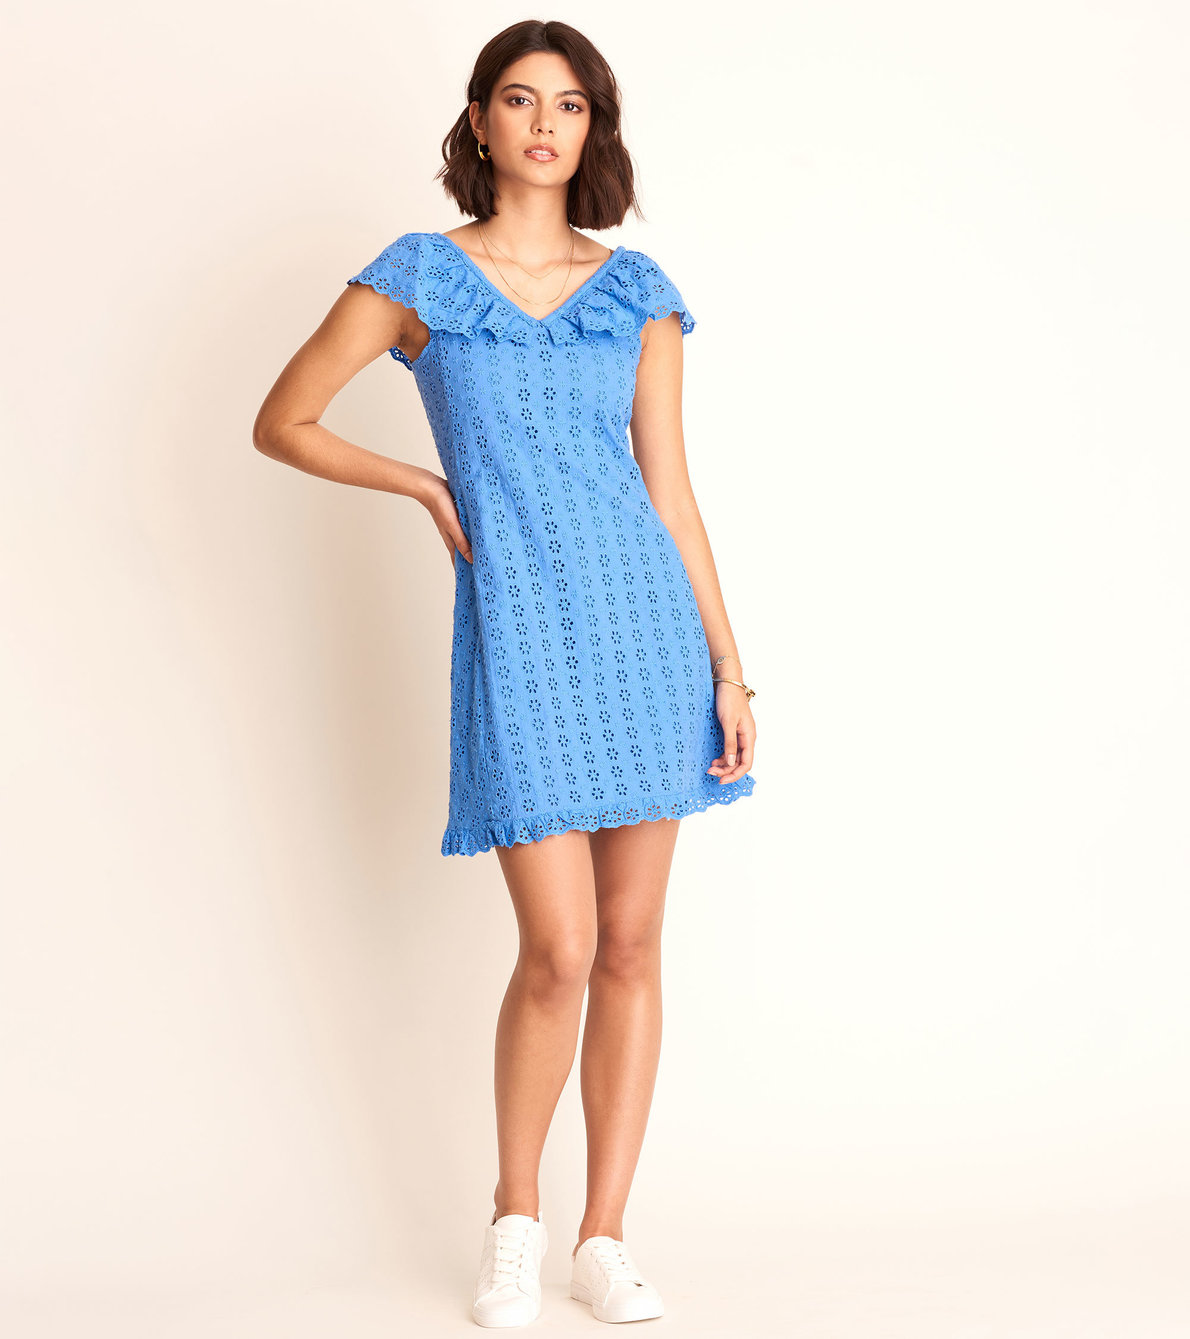 View larger image of Eyelet Shift Dress - Periwinkle